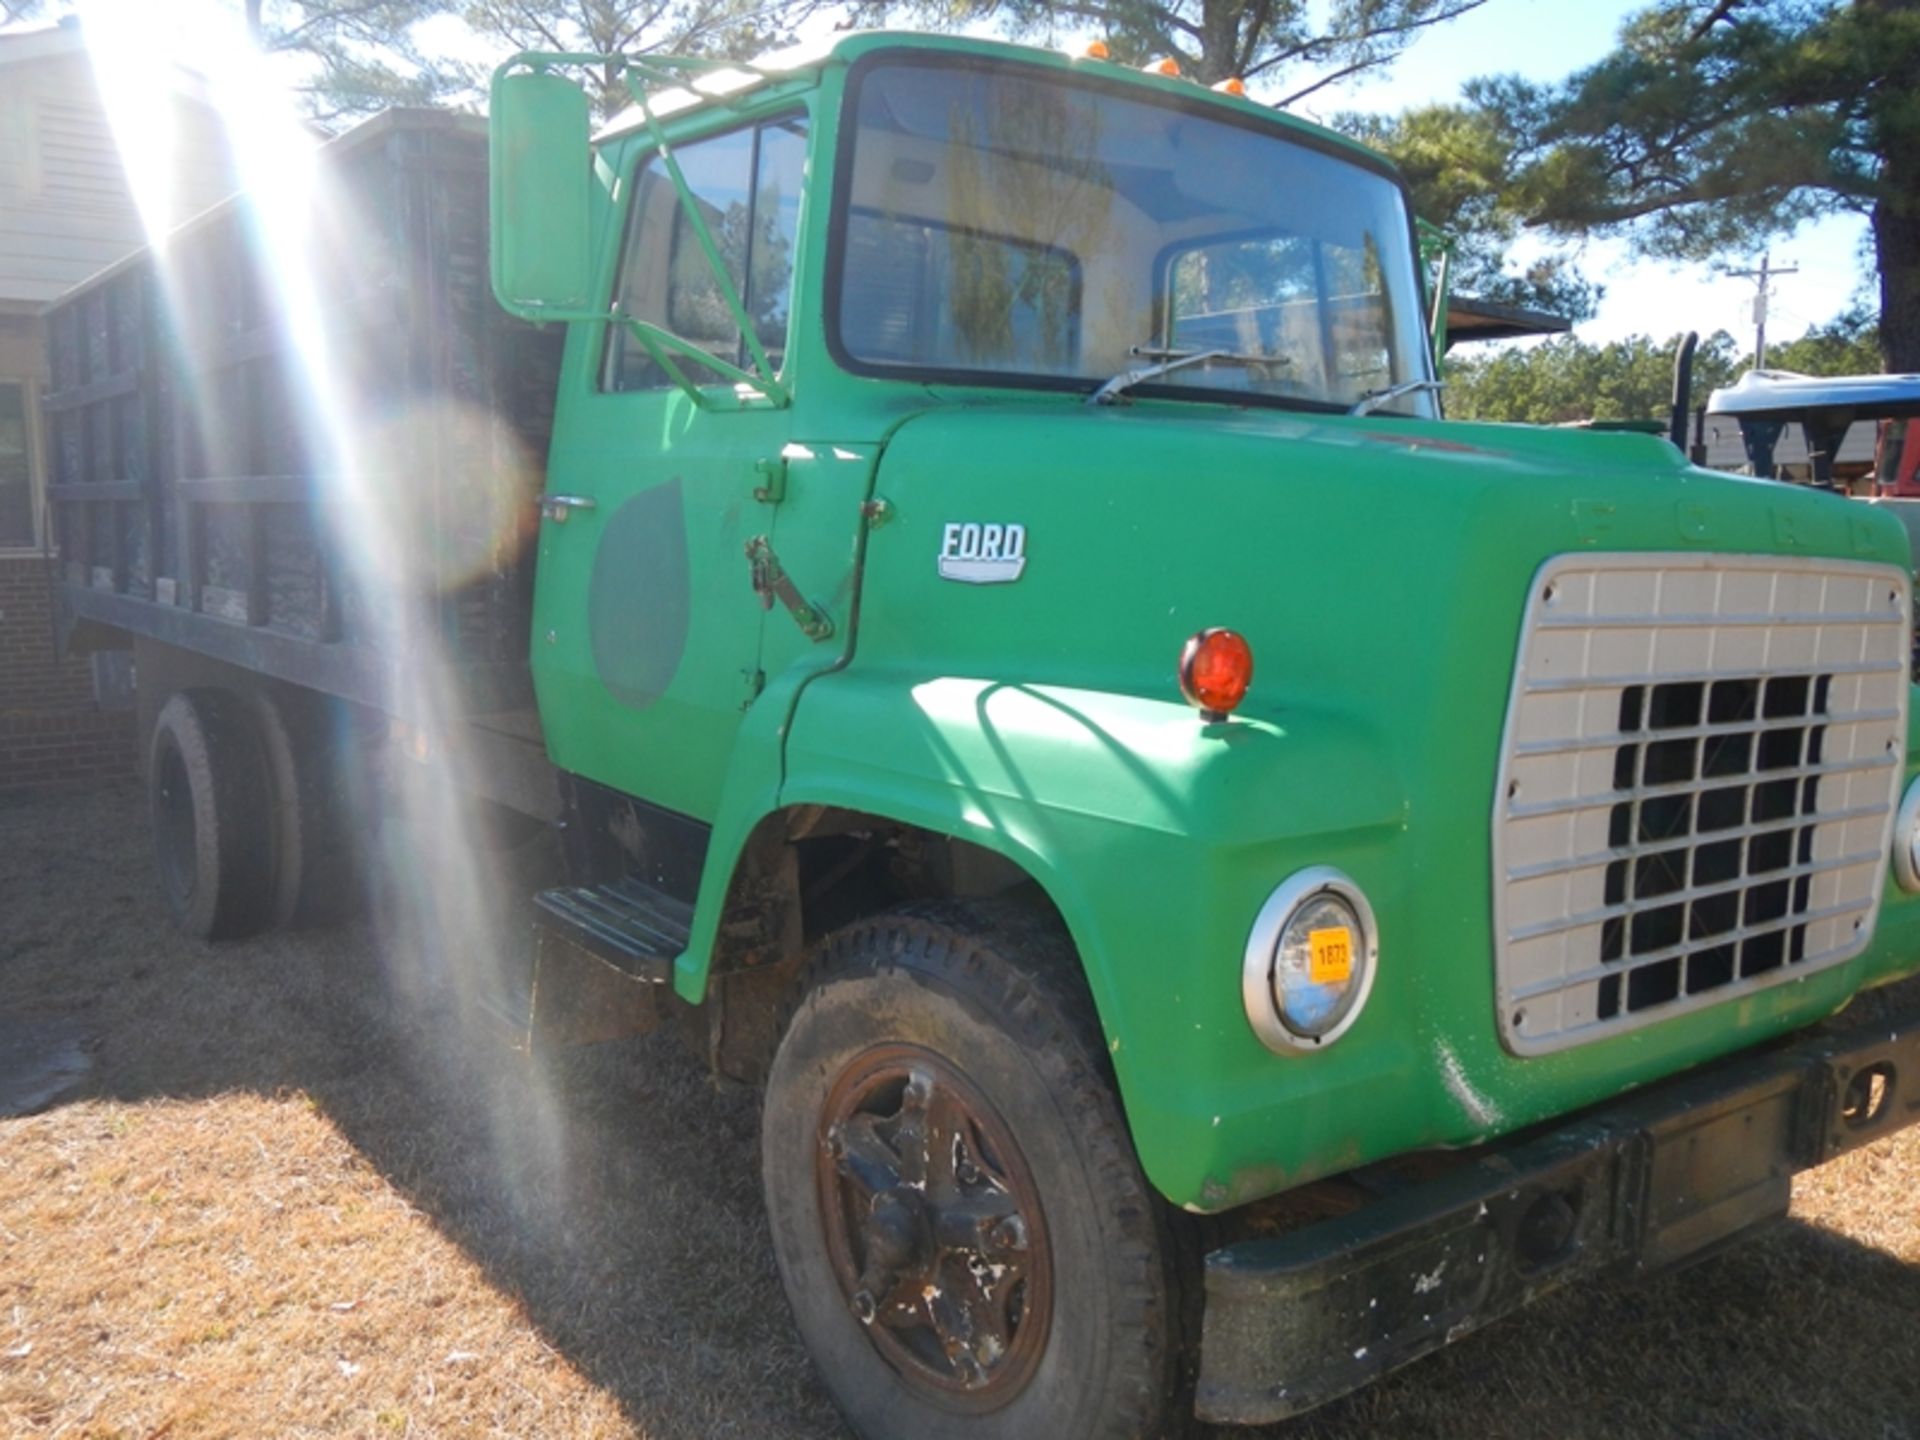 1974 Ford 2 ton vin N70EVS15235 runs but needs tuneup been sitting several years